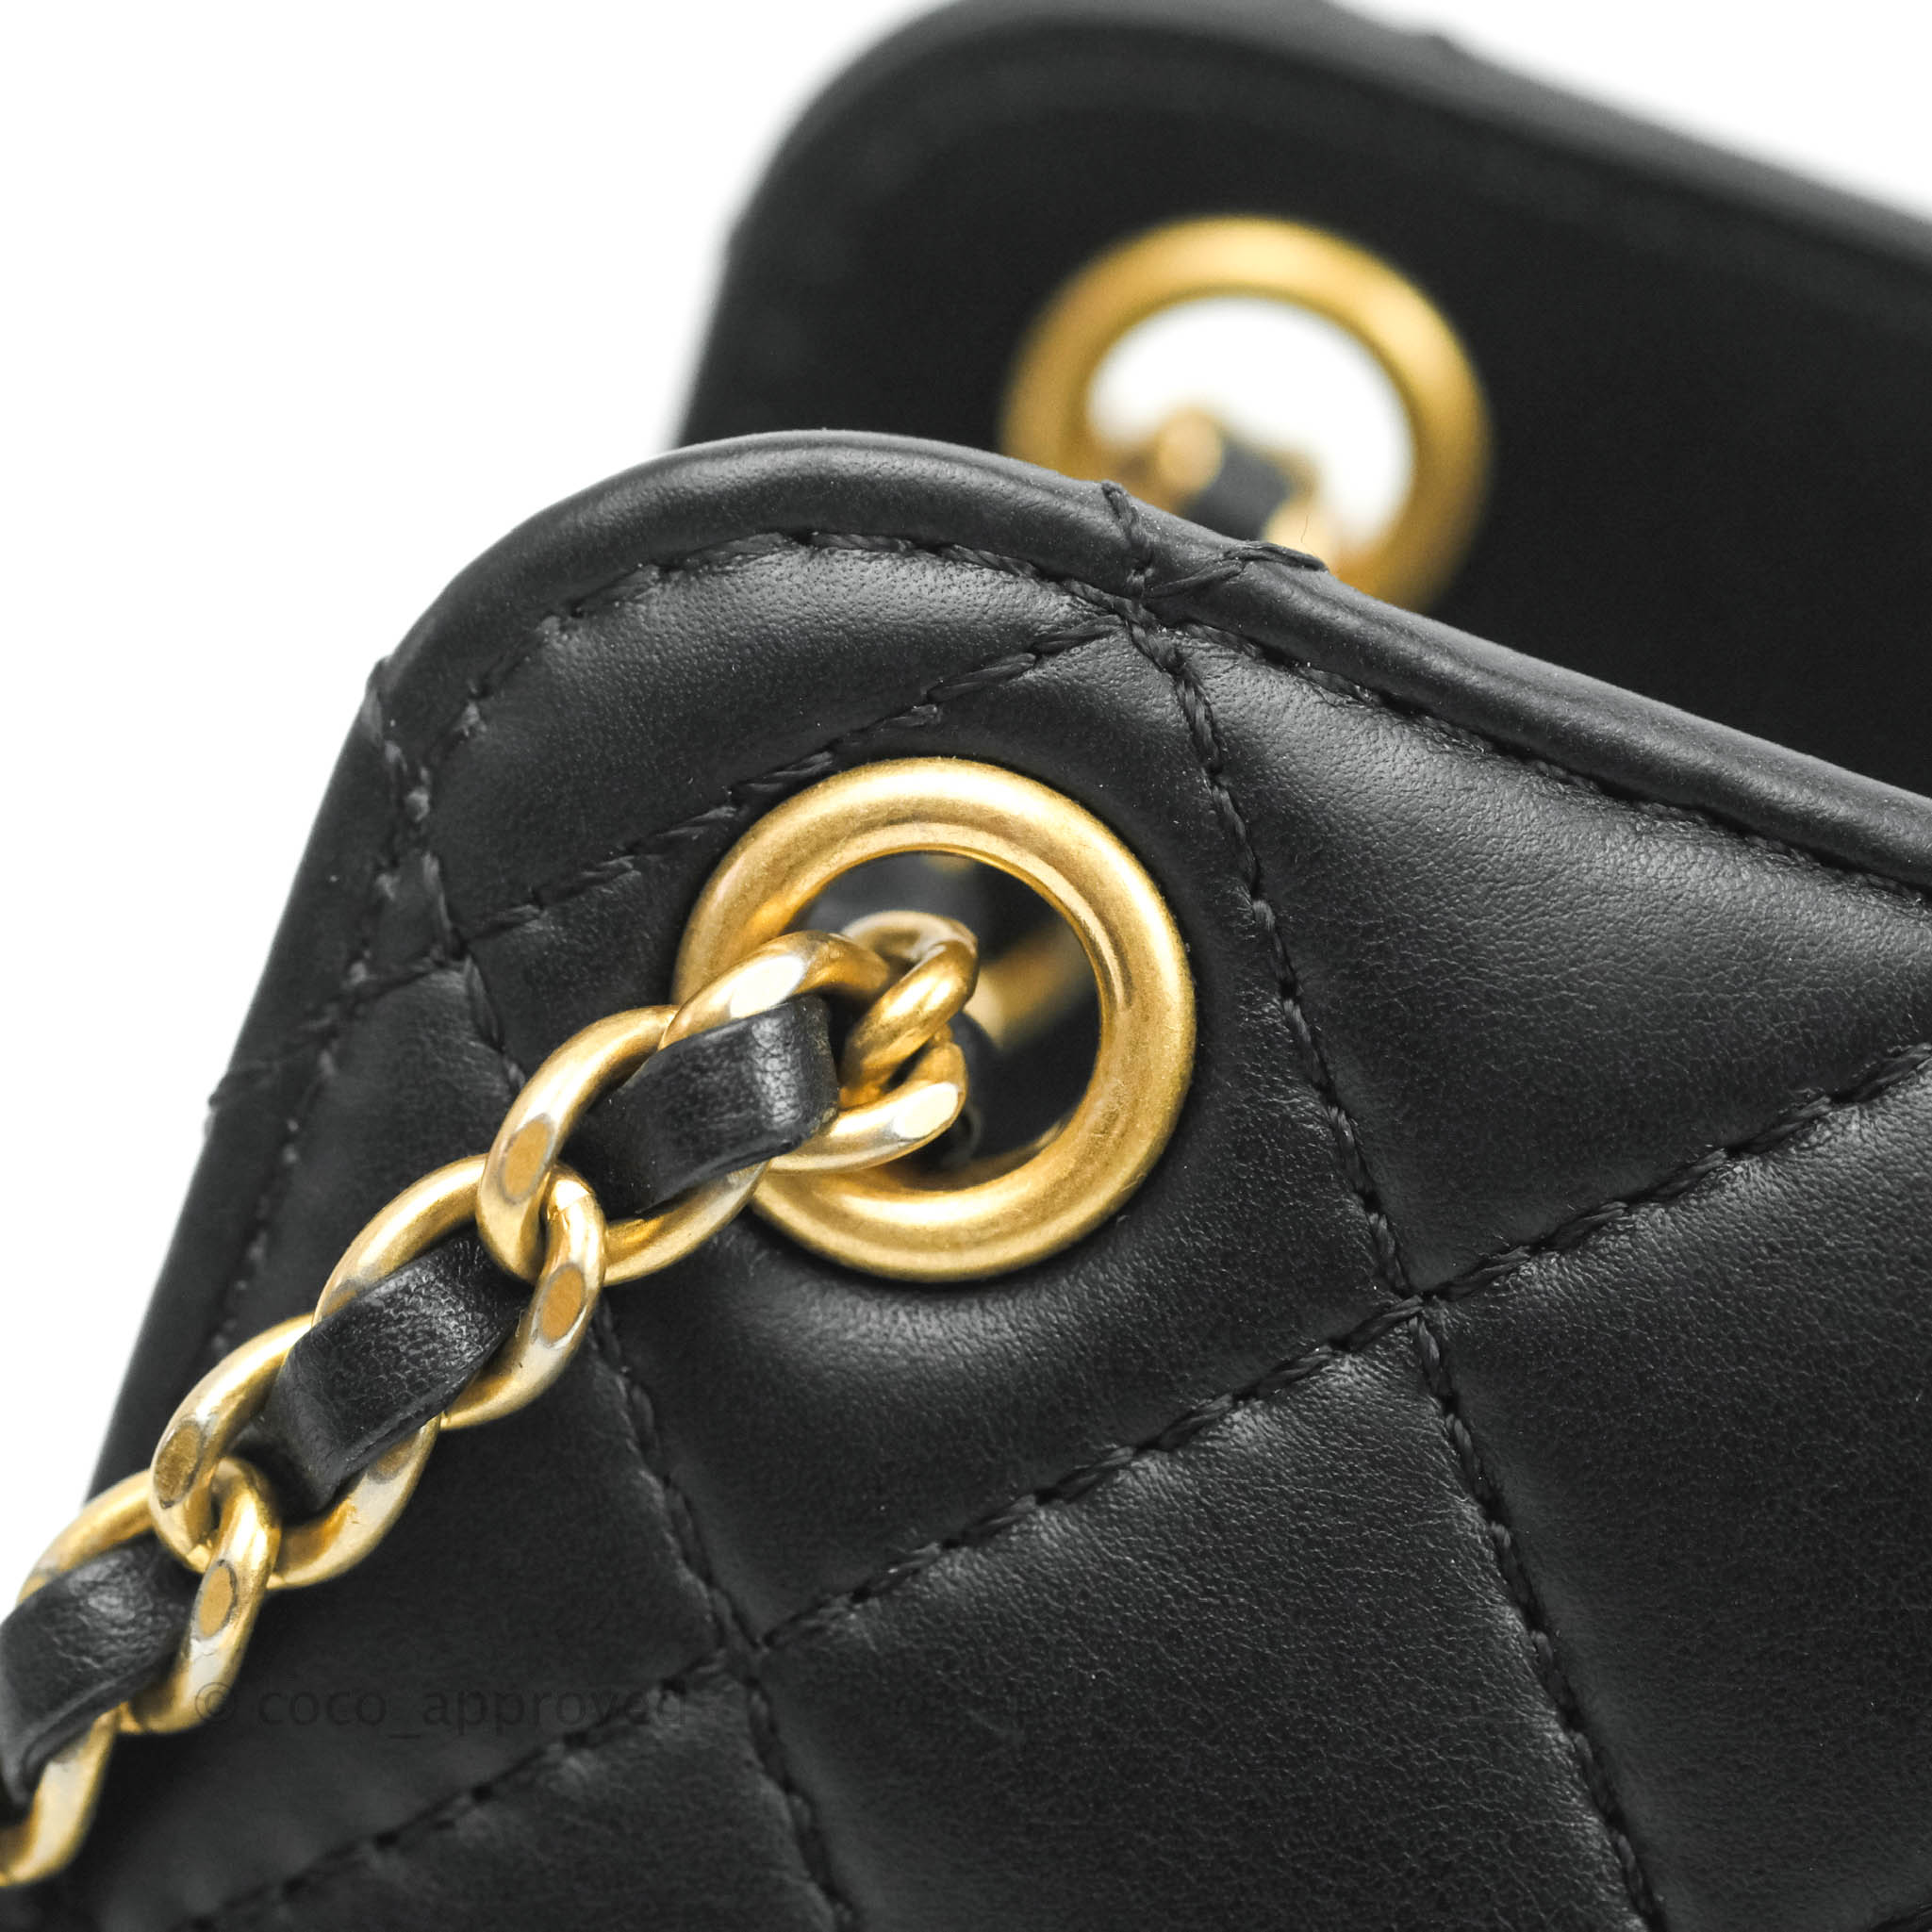 Chanel Accordion Bucket Bag Review: A New Classic